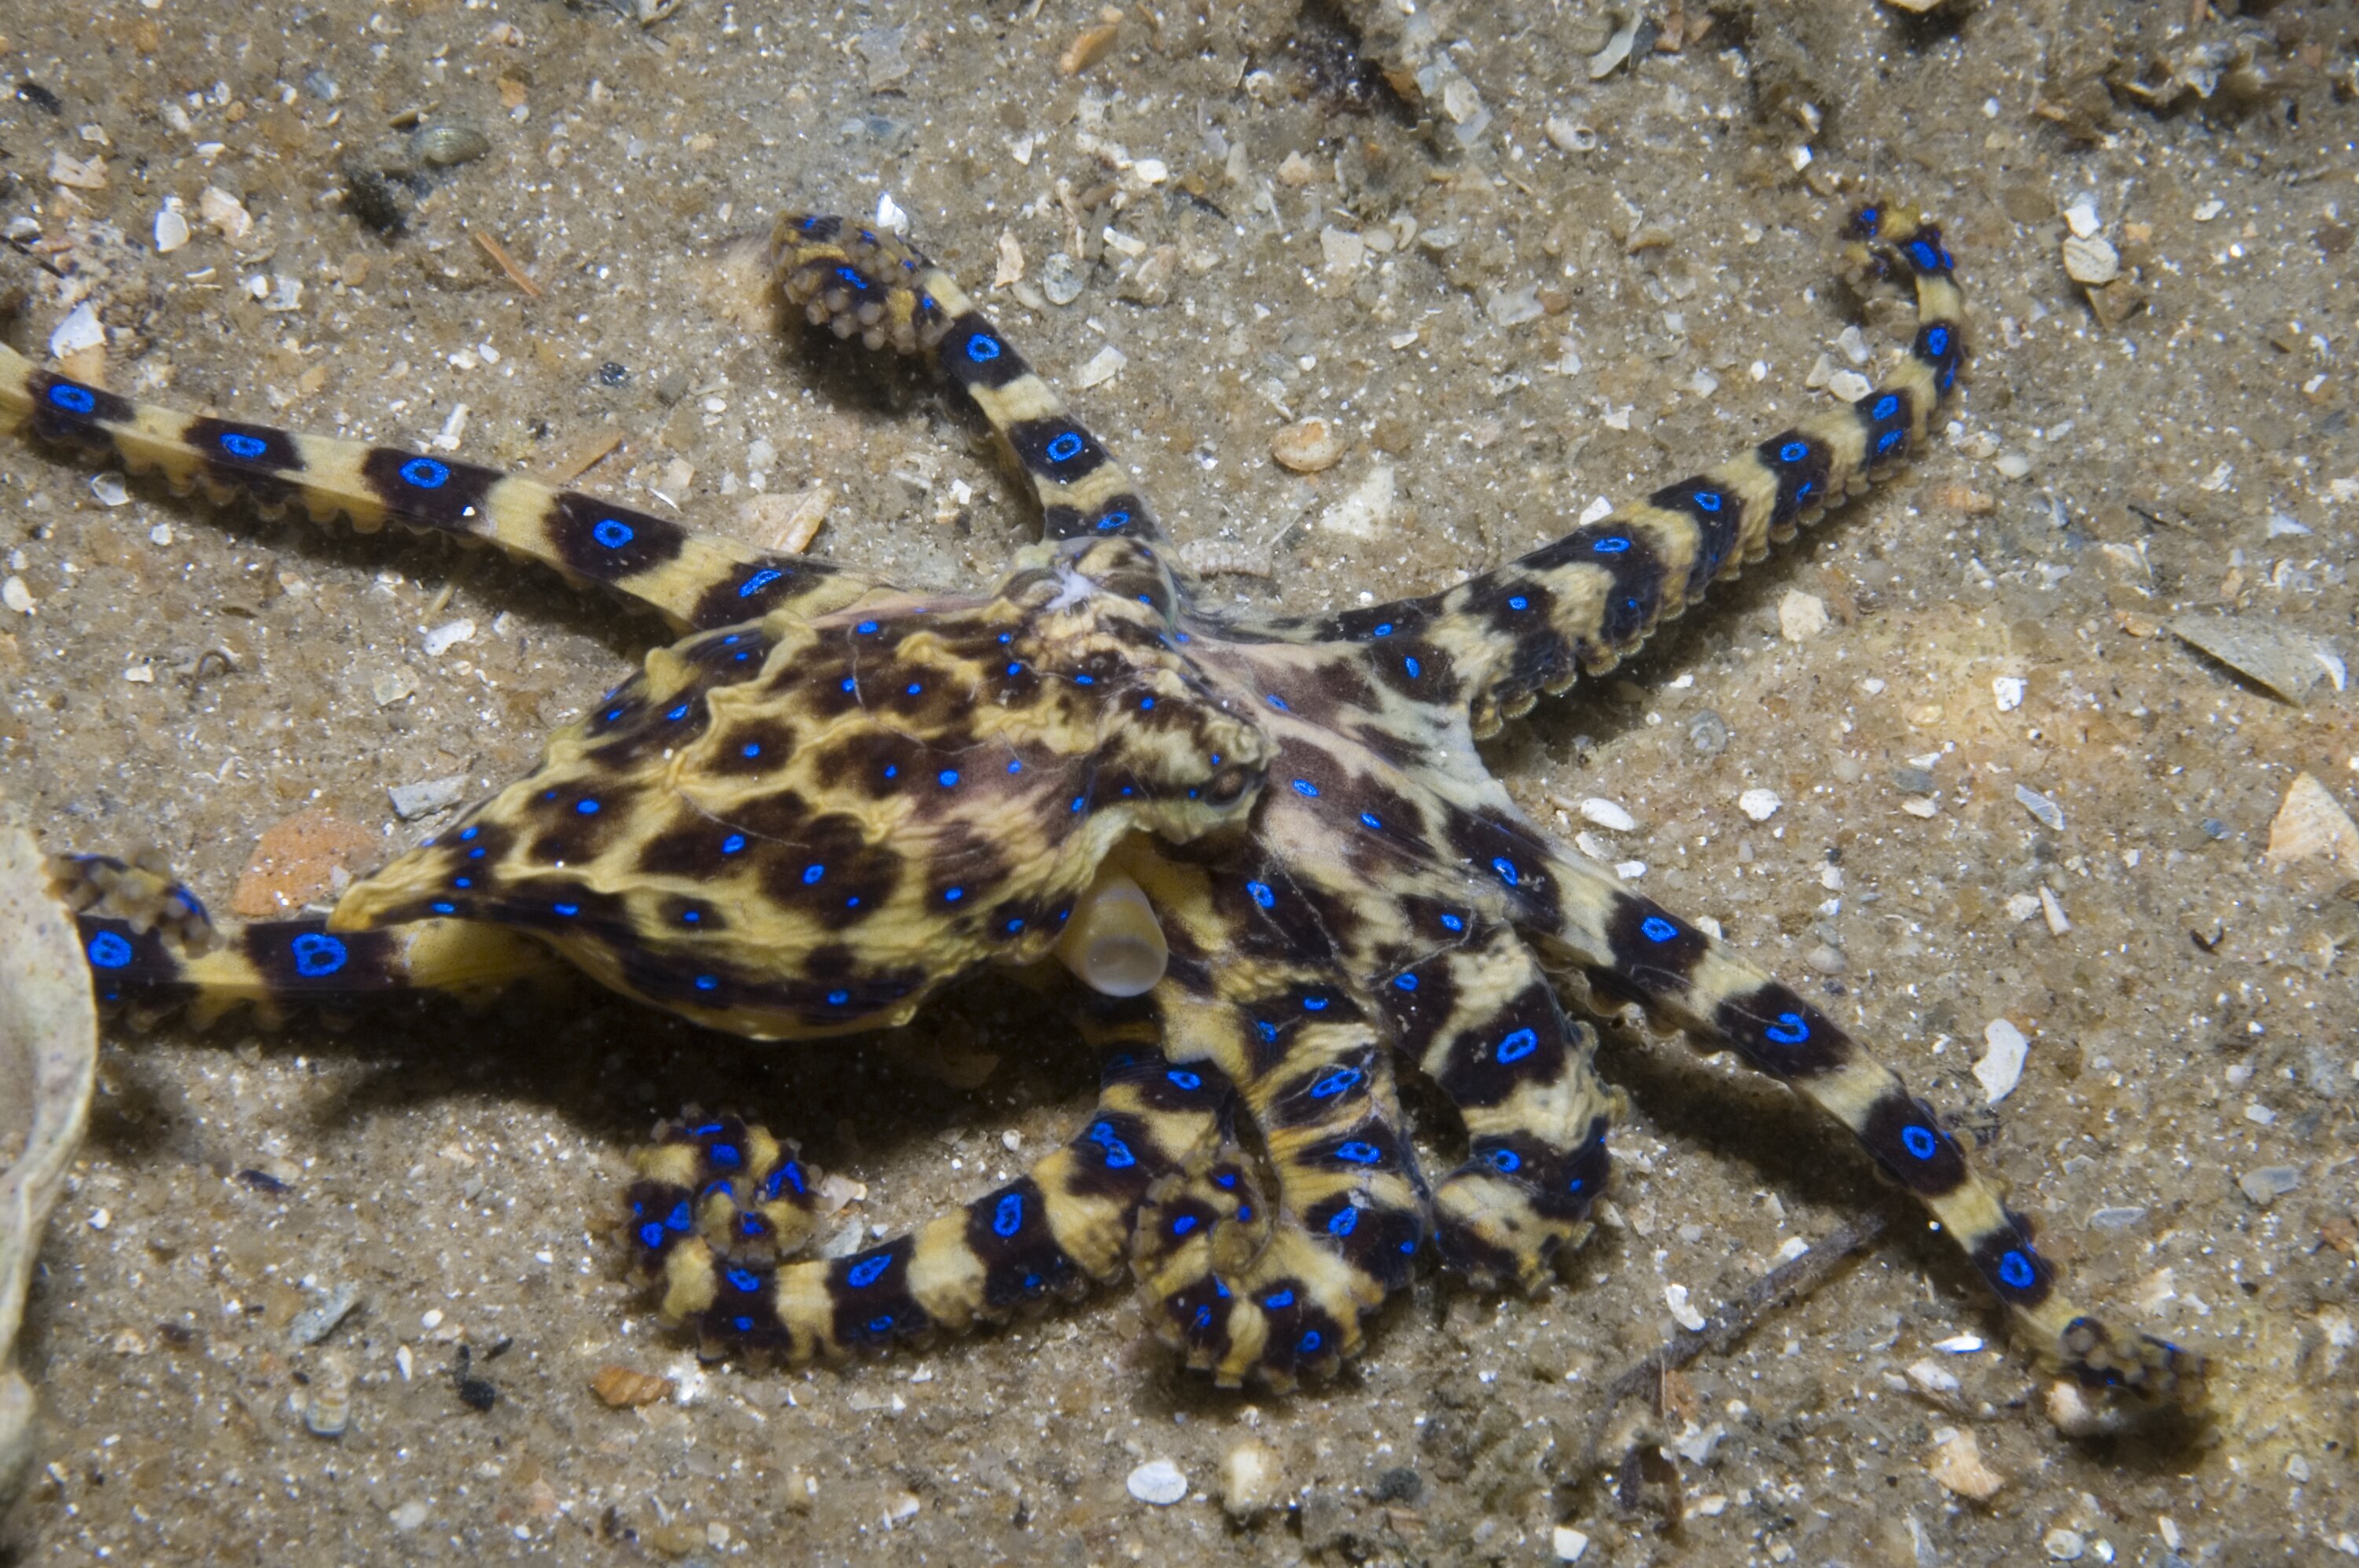 Blue-ringed octopus (highly venomous) on hand. : r/WTF